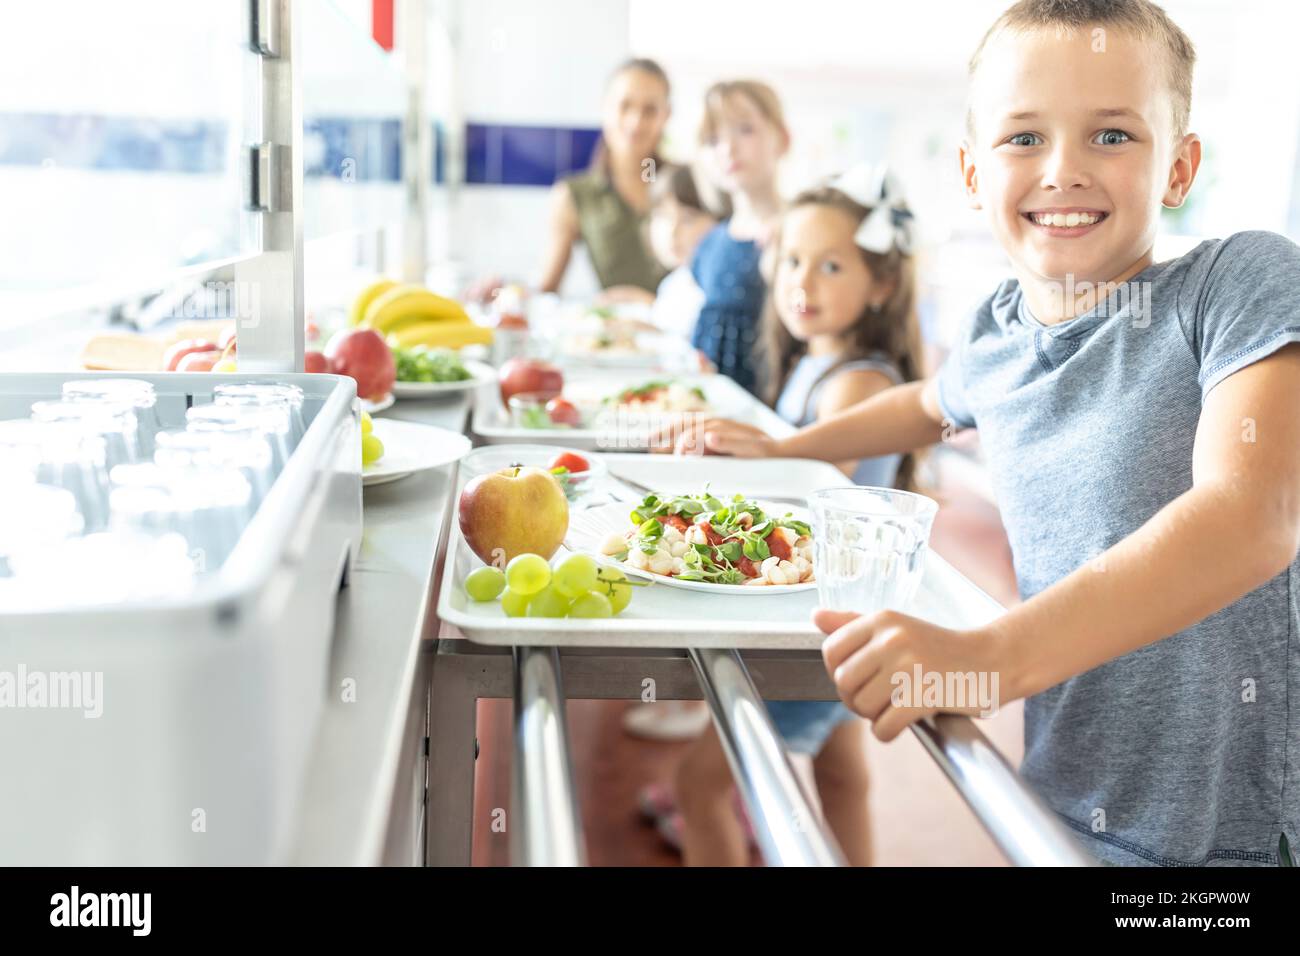 Happy schoolboy with healthy meal at lunch break Stock Photo